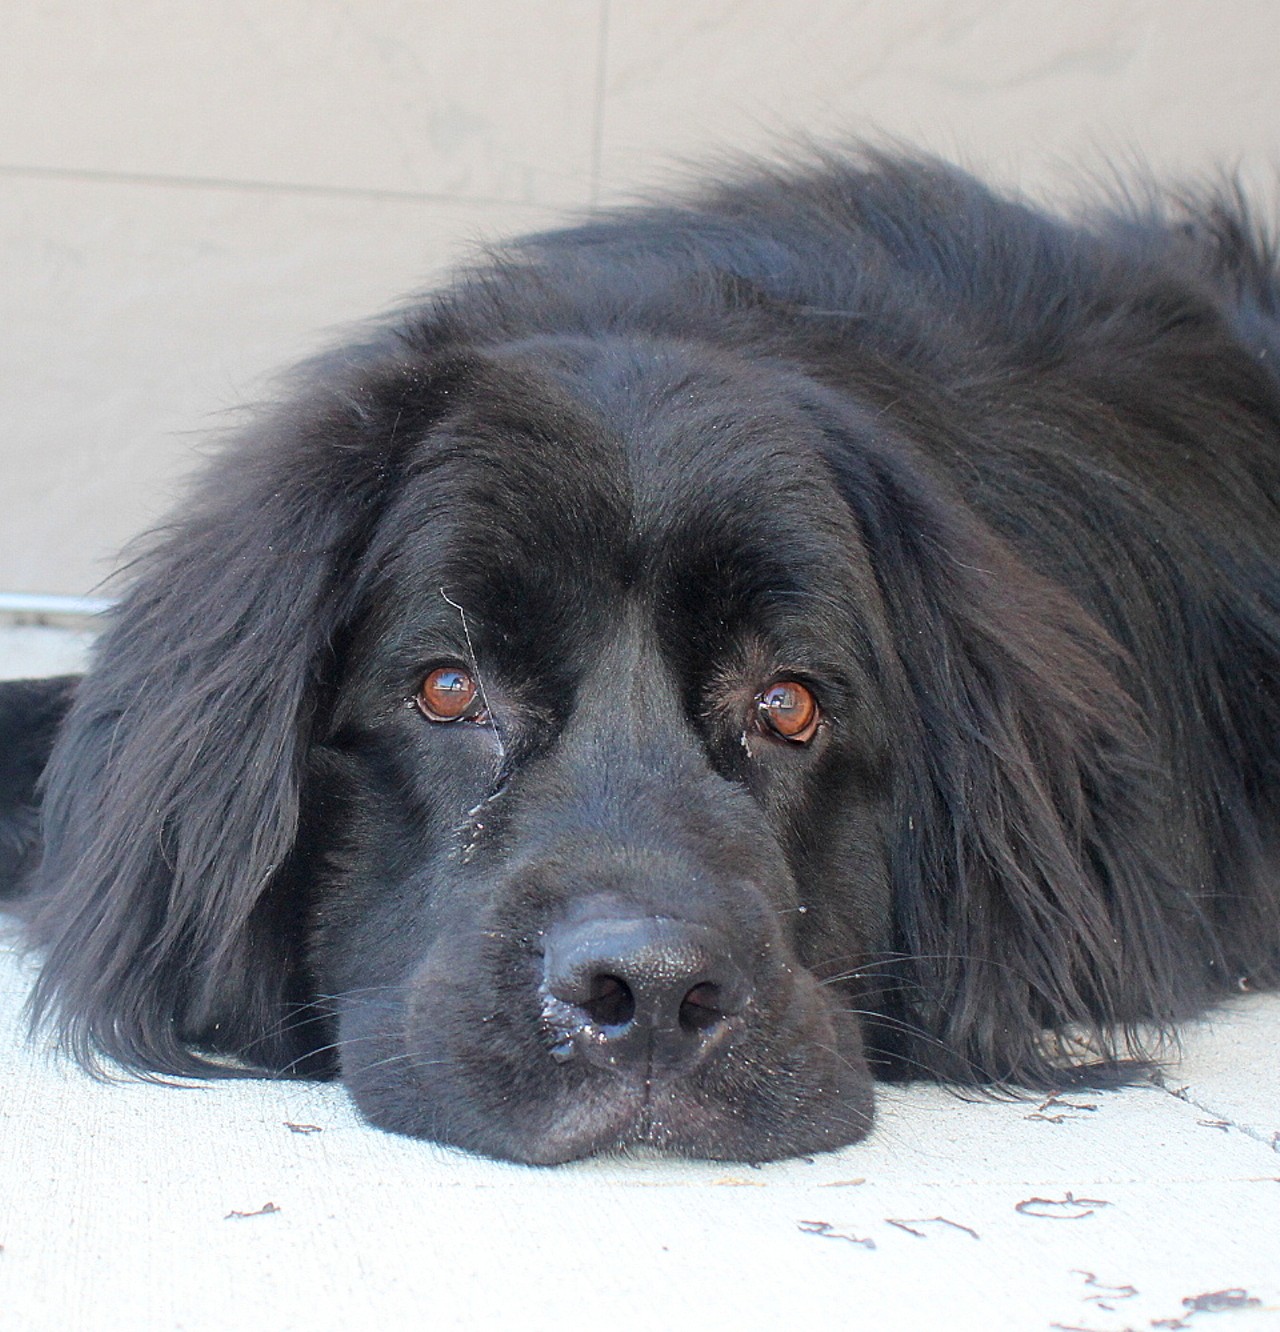 NAME: Kobe
GENDER: Male
BREED: Newfoundland
AGE: 3 years
WEIGHT: 142 pounds
SPECIAL CONSIDERATIONS: None
REASON I CAME TO MHS: Owner surrender
LOCATION: Mackey Center for Animal Care in Detroit
ID NUMBER: 867329